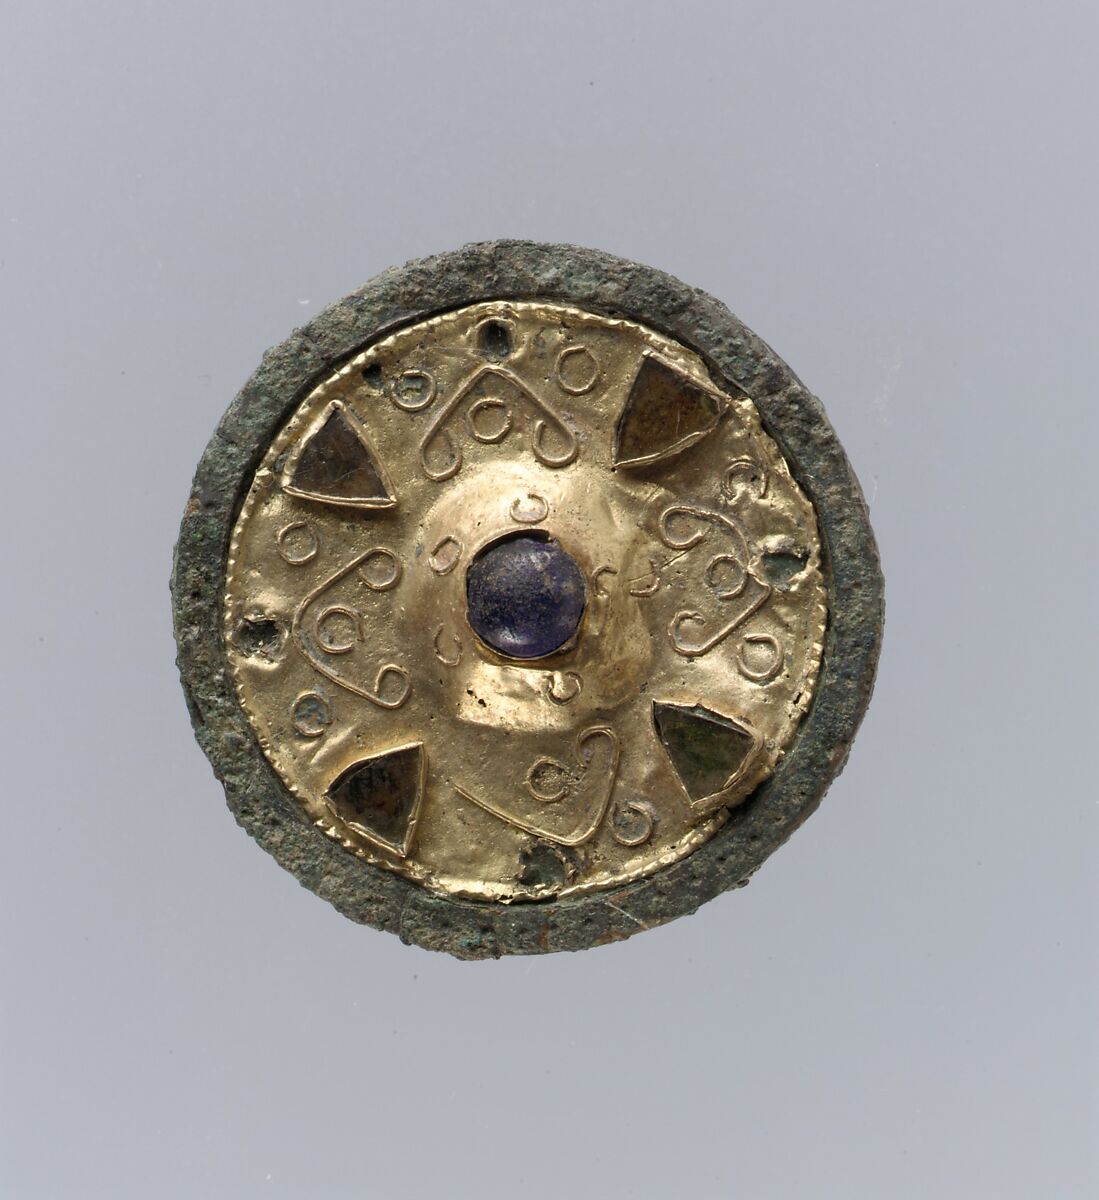 Disk Brooch, Gold, blue and pale amber glass, copper alloy support, Frankish 